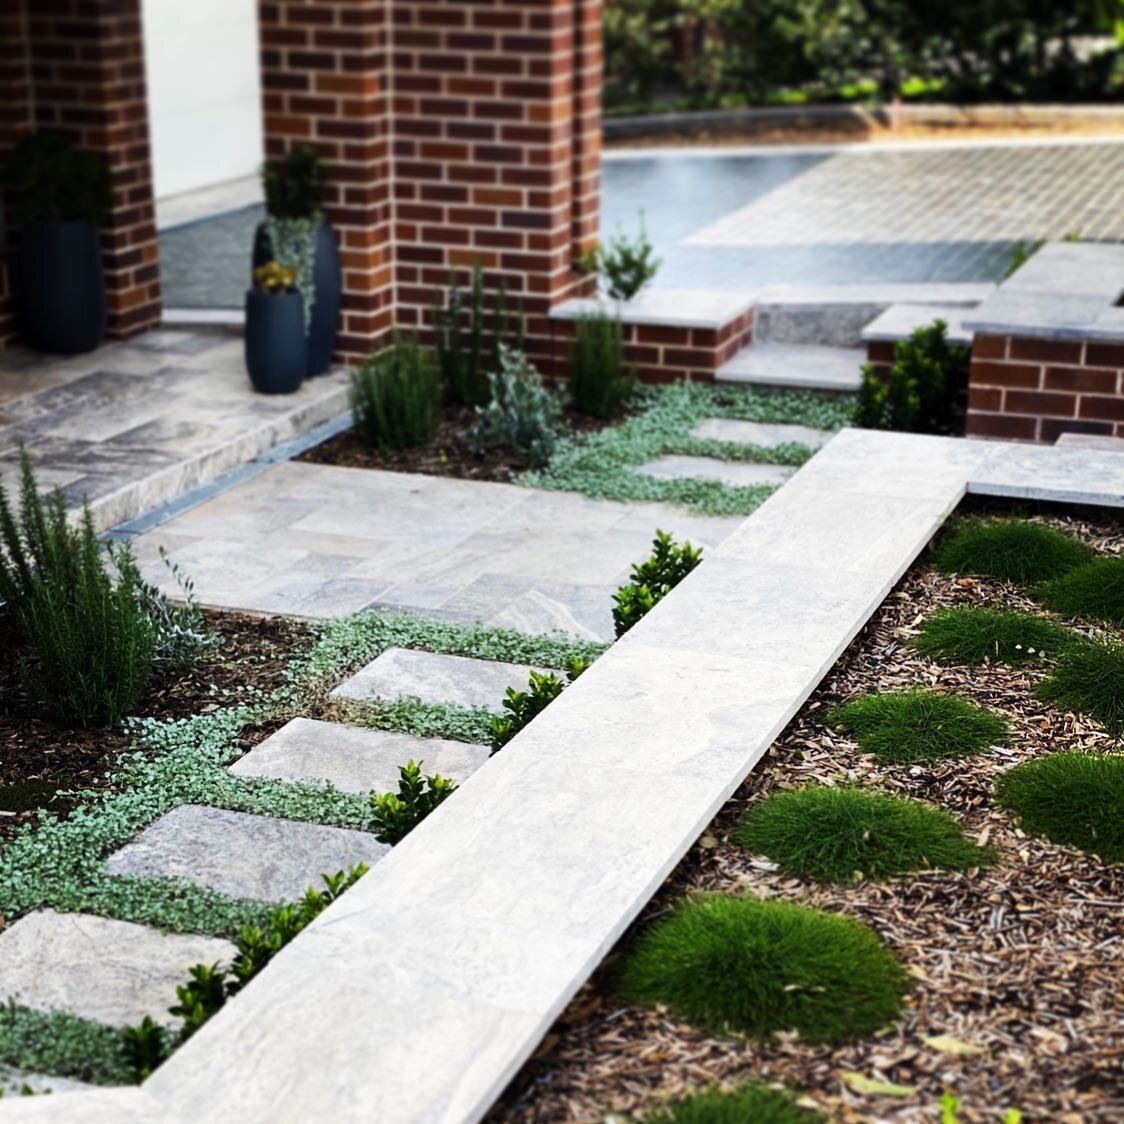 When elegance meets direction #beyondthegate #beyondthegatelandscaping #sydneylandscaper
#landscapers #allaspects #softscapes #conceptdesign #landscapeconstruction #softlandscaping #happyclient